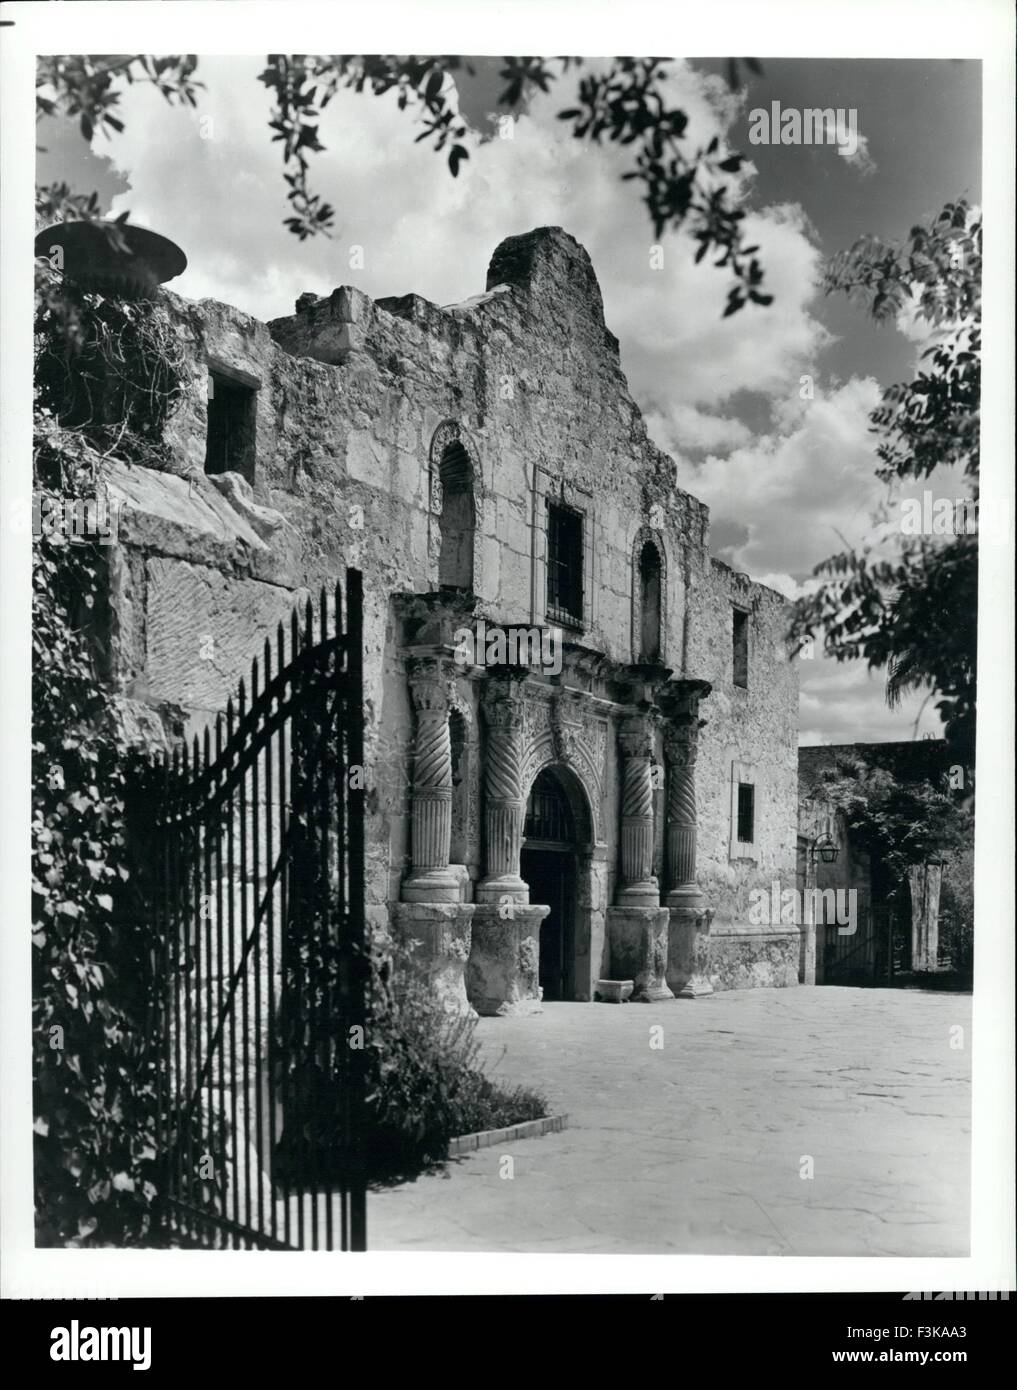 1952 - The Alamo: Shrine of Texas Liberty. Most famous of the missions. Present building is the old chapel of Mission San Antonio de Valero, founded in 1718 by the Franciscan padres. In 1836, during the war of Texas independence, the Alamo was the scene of one of the most heroic events in the history of our nations. All of the defending Texas soldiers were killed here while besieged by troops under the Mexican general Santa Anna. The now reknown battle cry ''Remember the Alamo'' later carried the Texans to victory. © Keystone Pictures USA/ZUMAPRESS.com/Alamy Live News Stock Photo